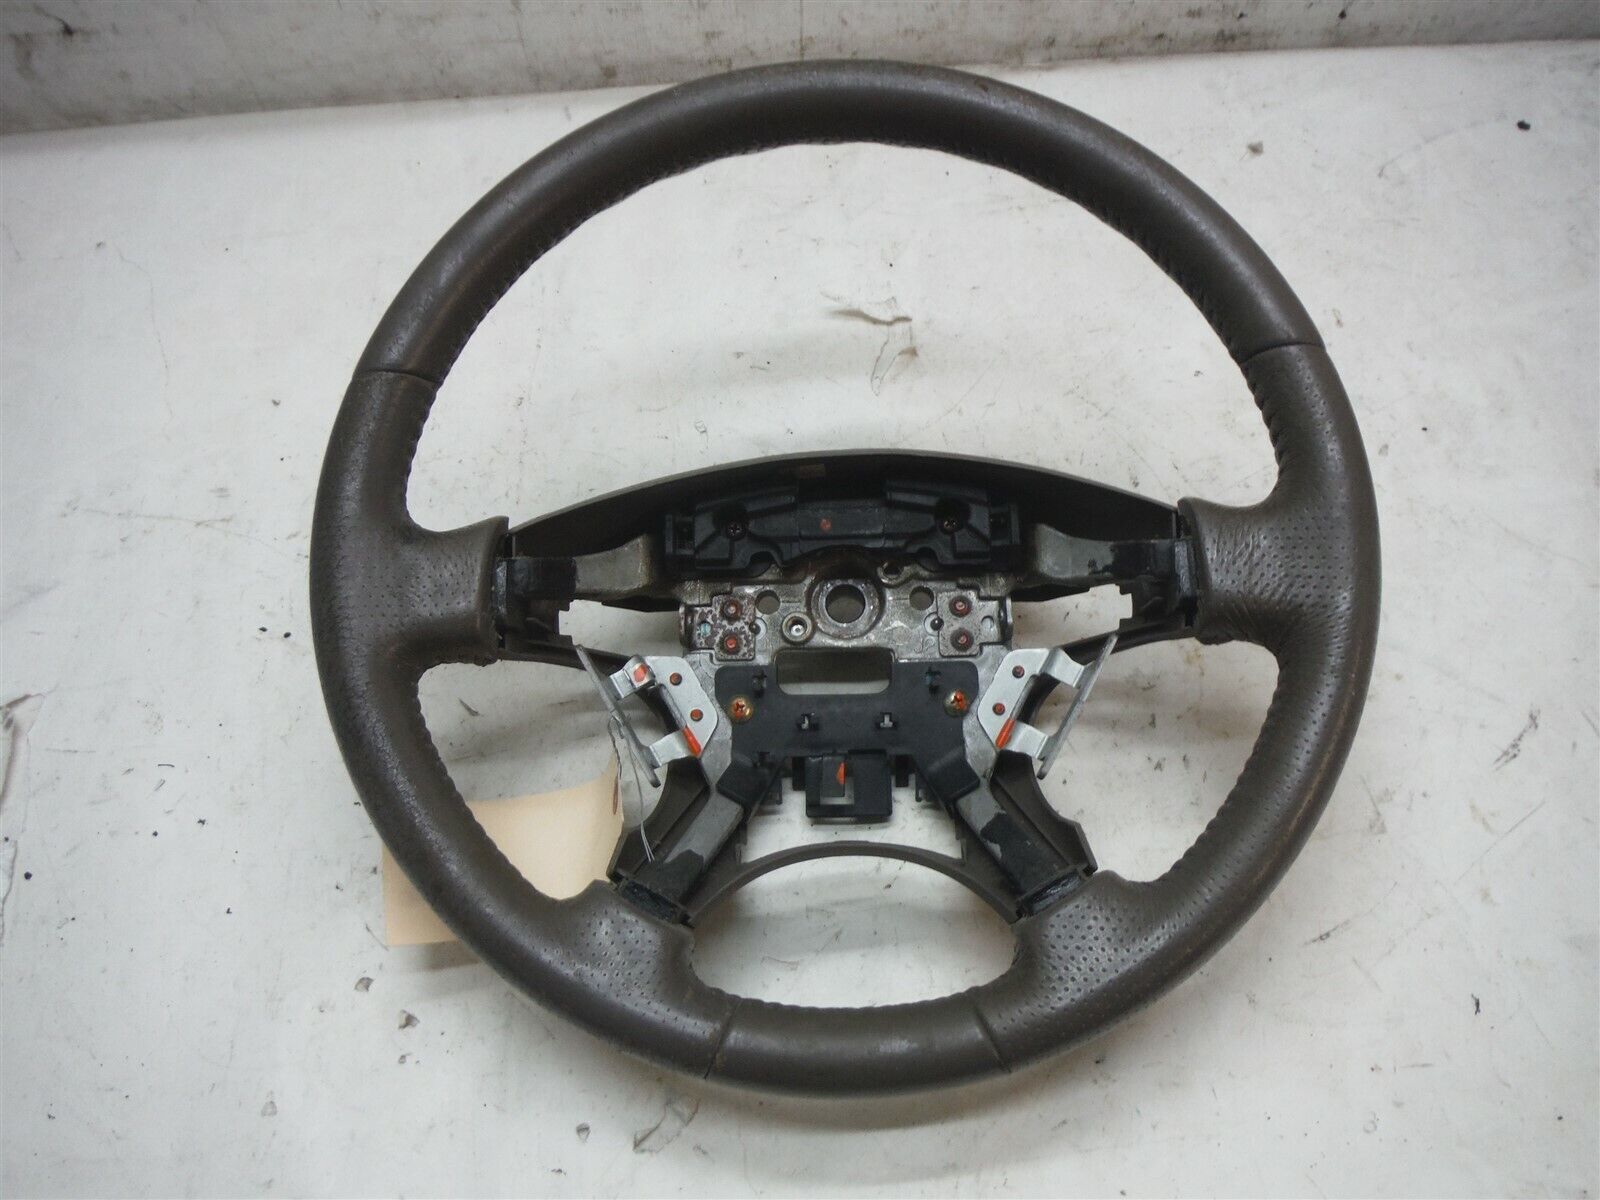 2003 ACURA 3.2 TL DRIVER LEFT FRONT STEERING WHEEL ASSEMBLY OEM 2002-2003